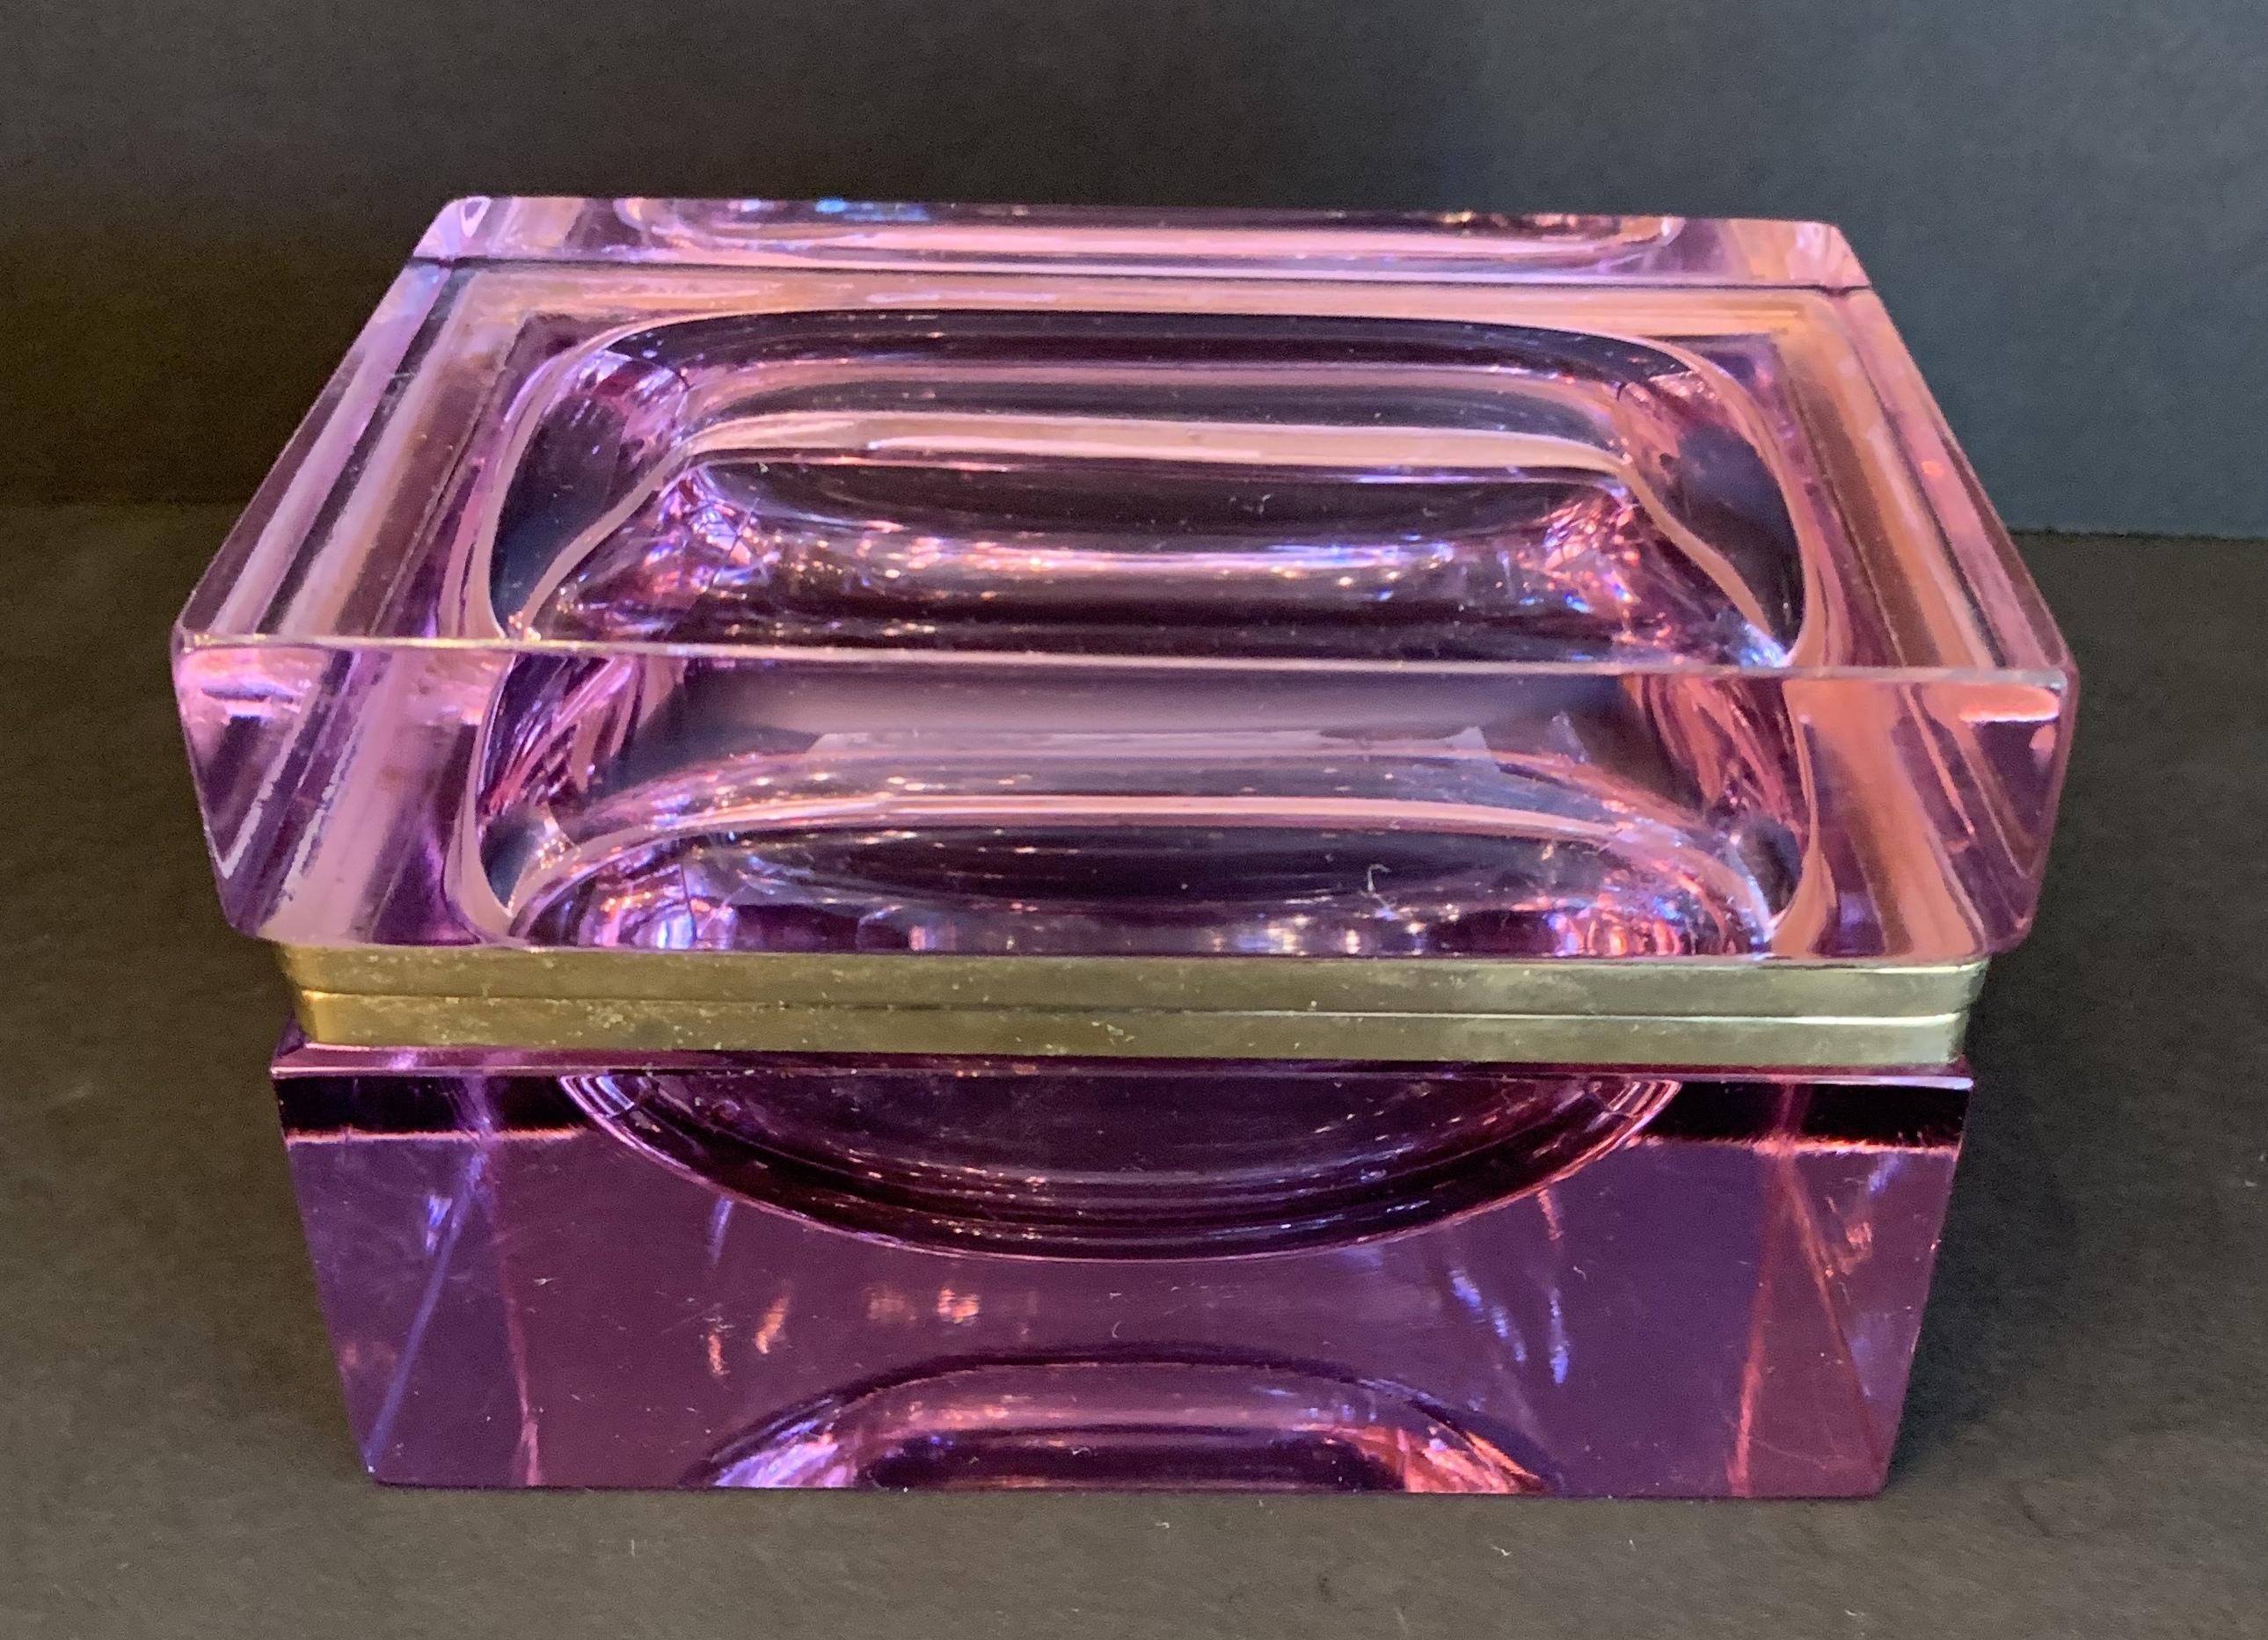 A wonderful and rare Mid-Century Modern French amethyst color crystal or glass ormolu-mounted bronze casket box. Please note there is an almost unnoticeable small piece of glass. Crystal missing under the bronze frame towards the rear left top of